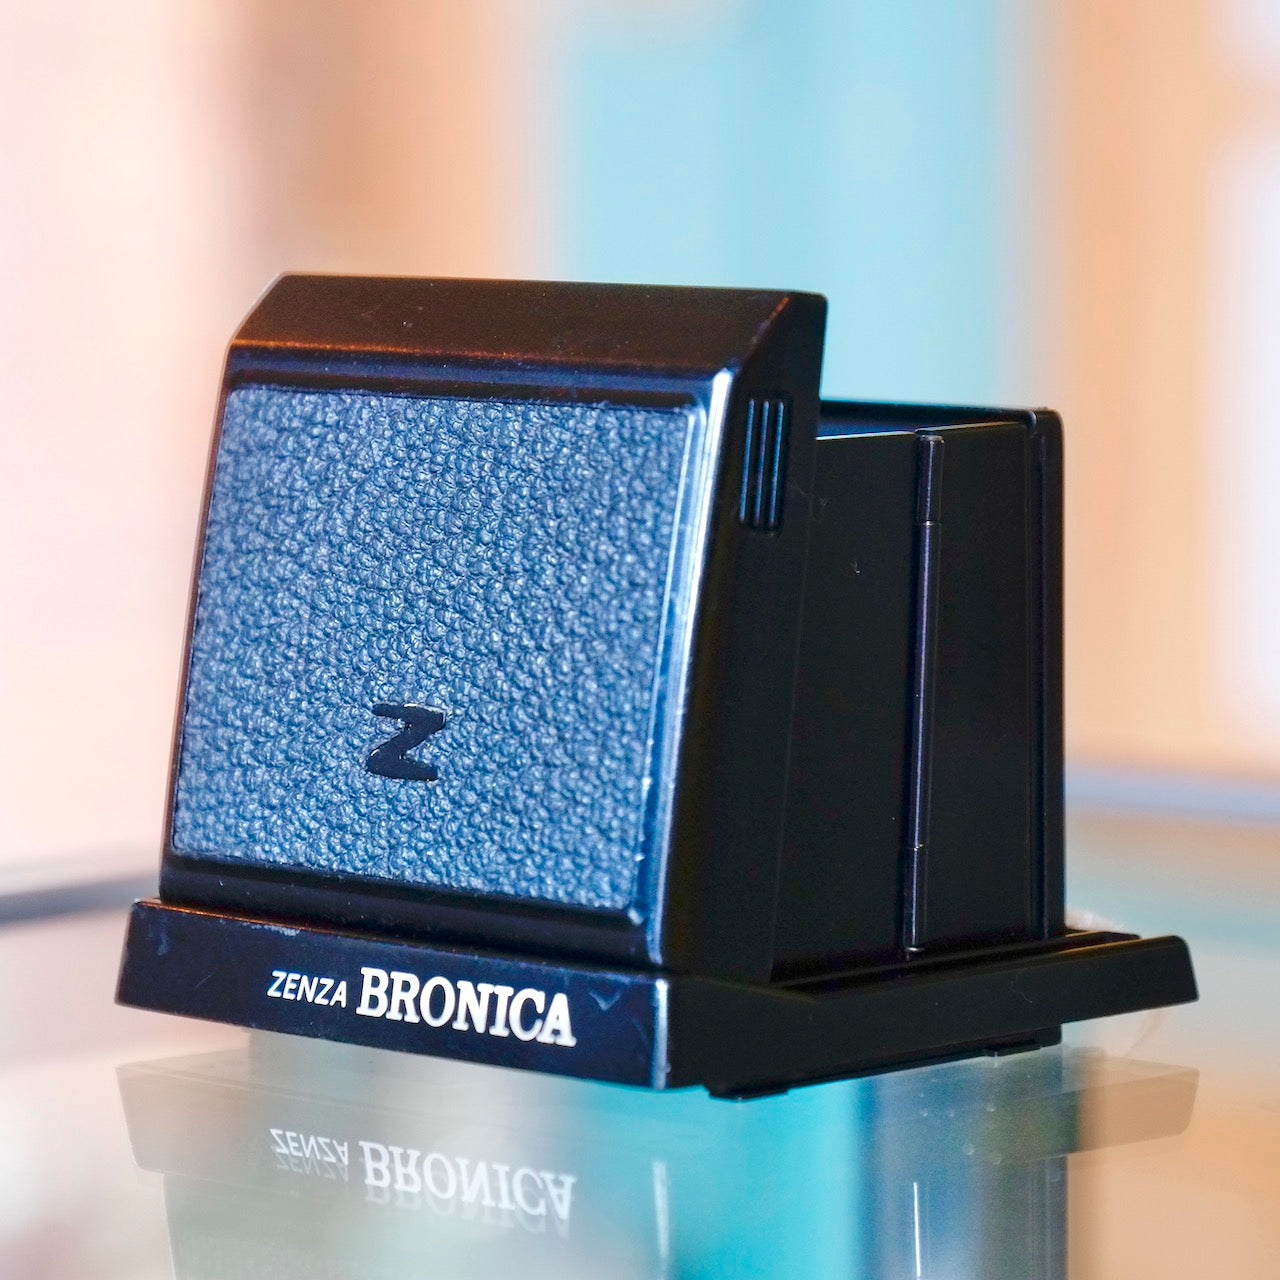 Bronica waist-level viewfinder for GS-1